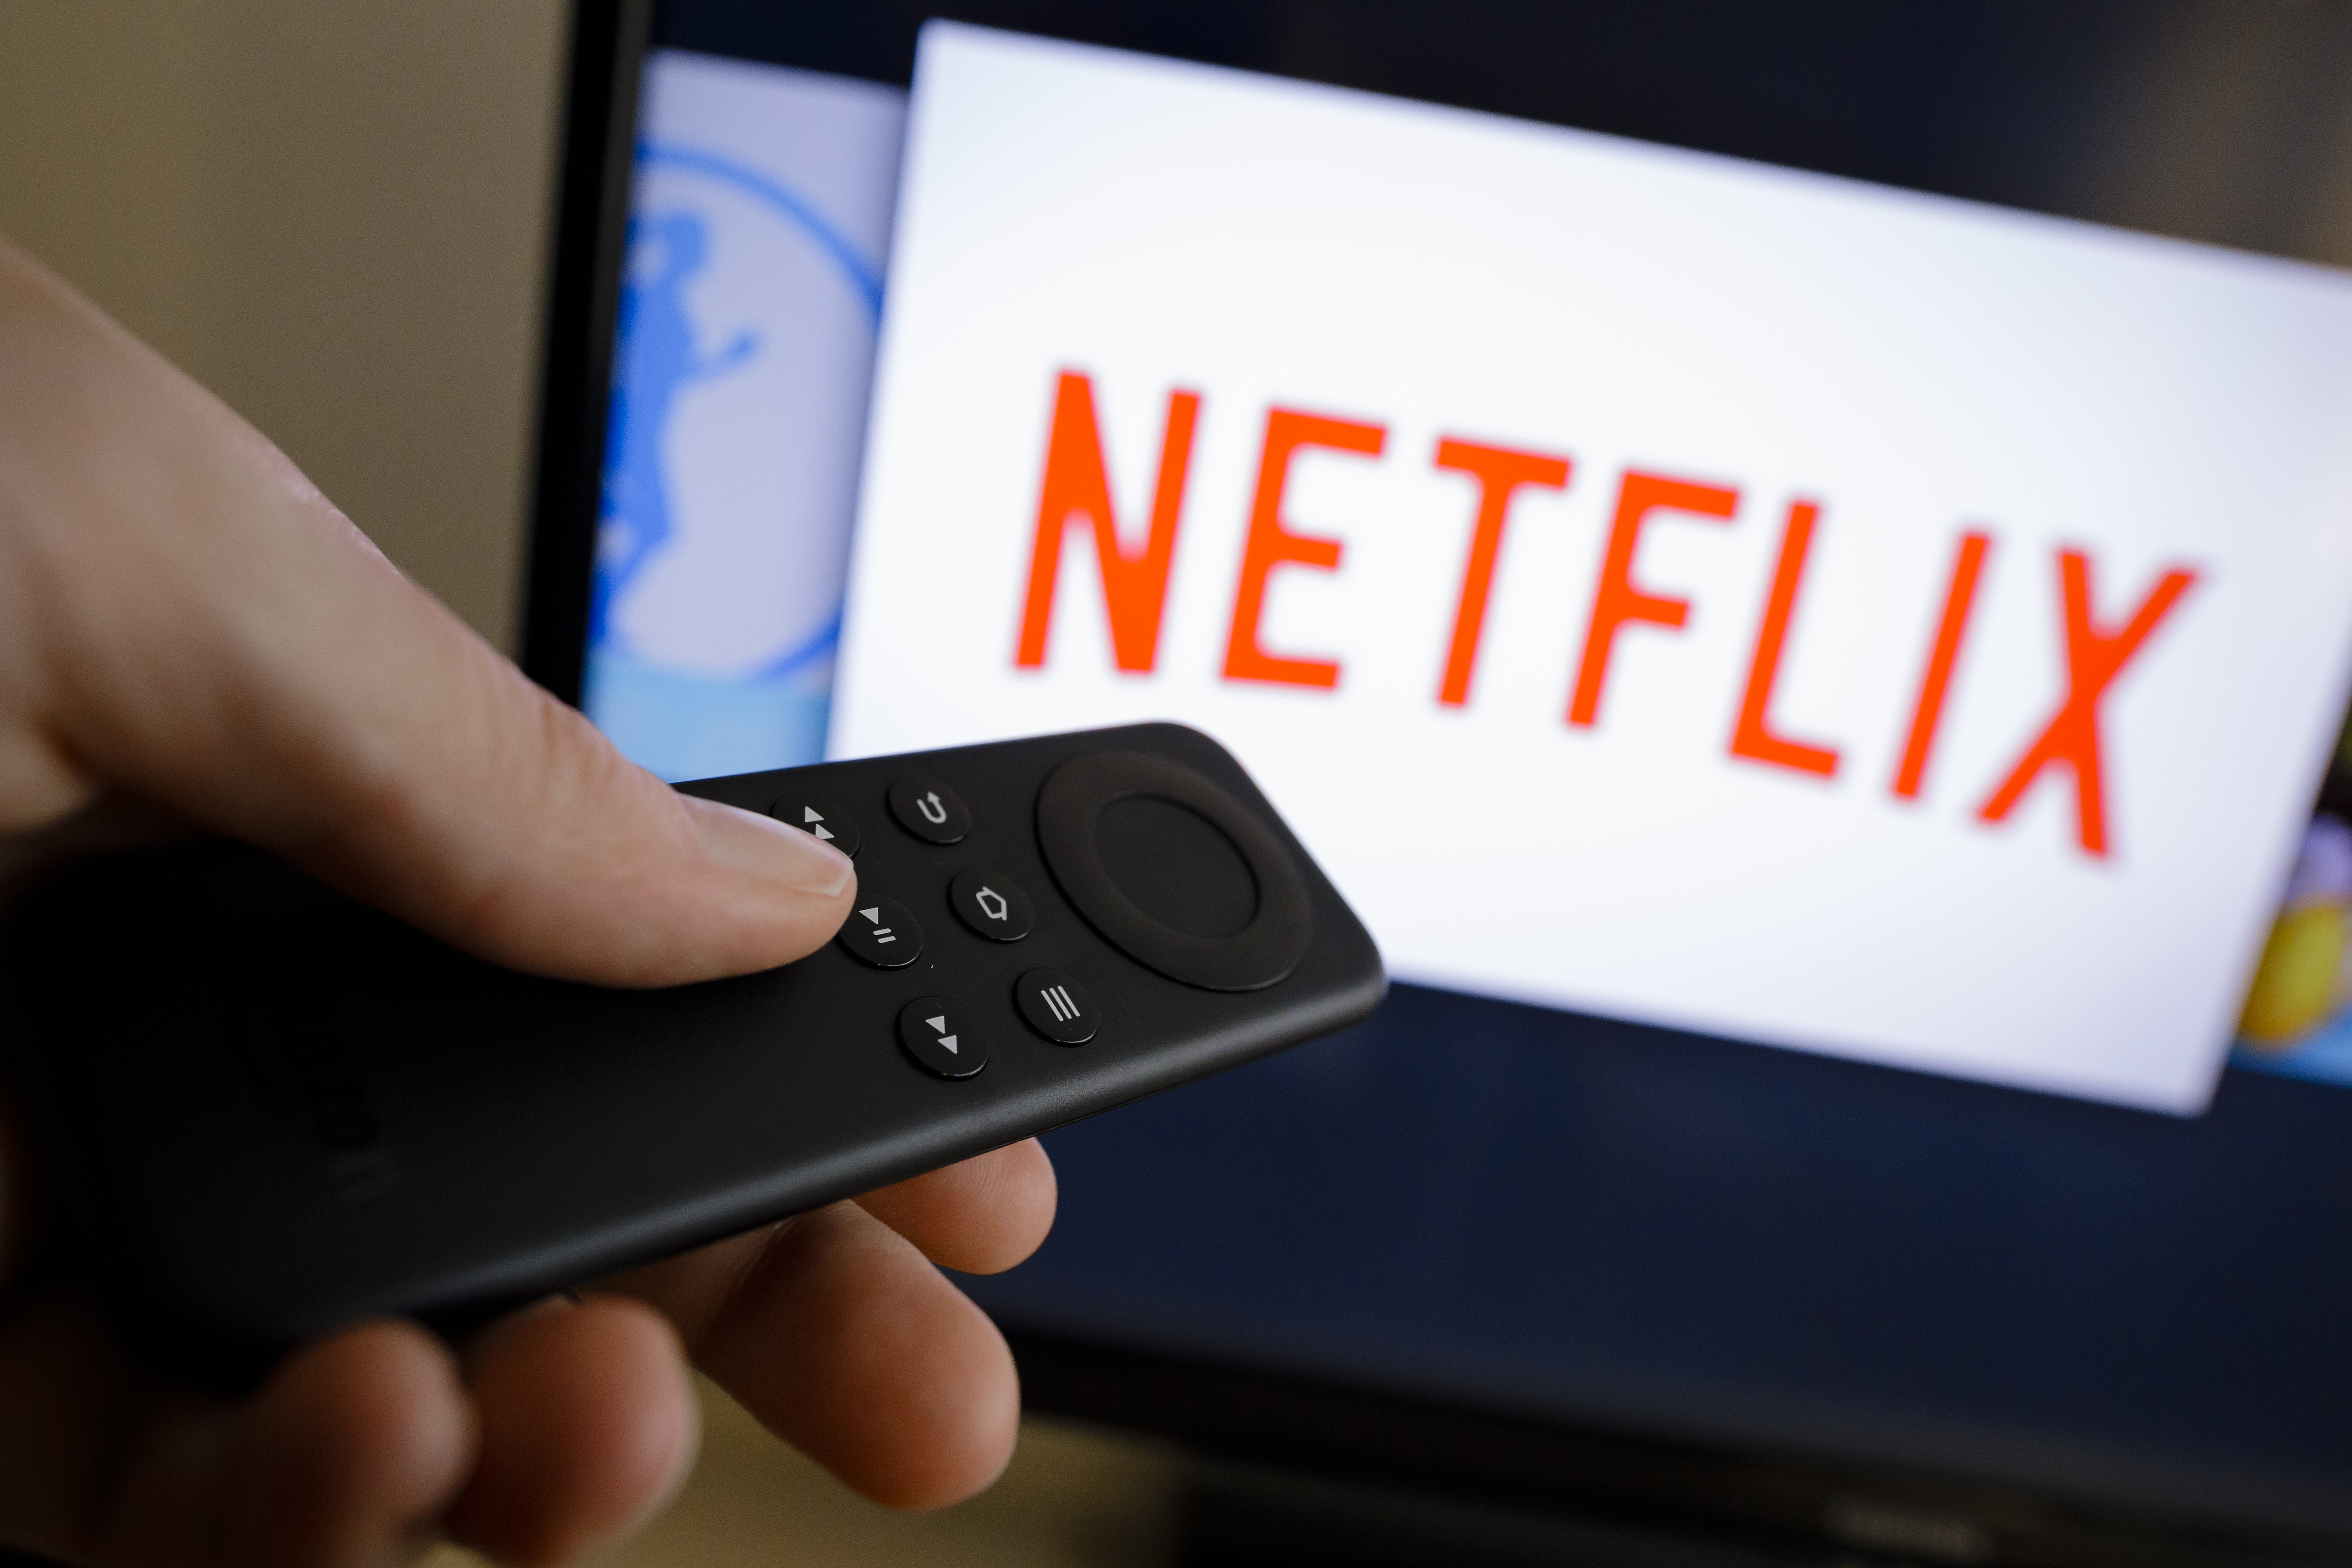 There's a New Netflix Email Scam Going Around. Here's How to Spot It